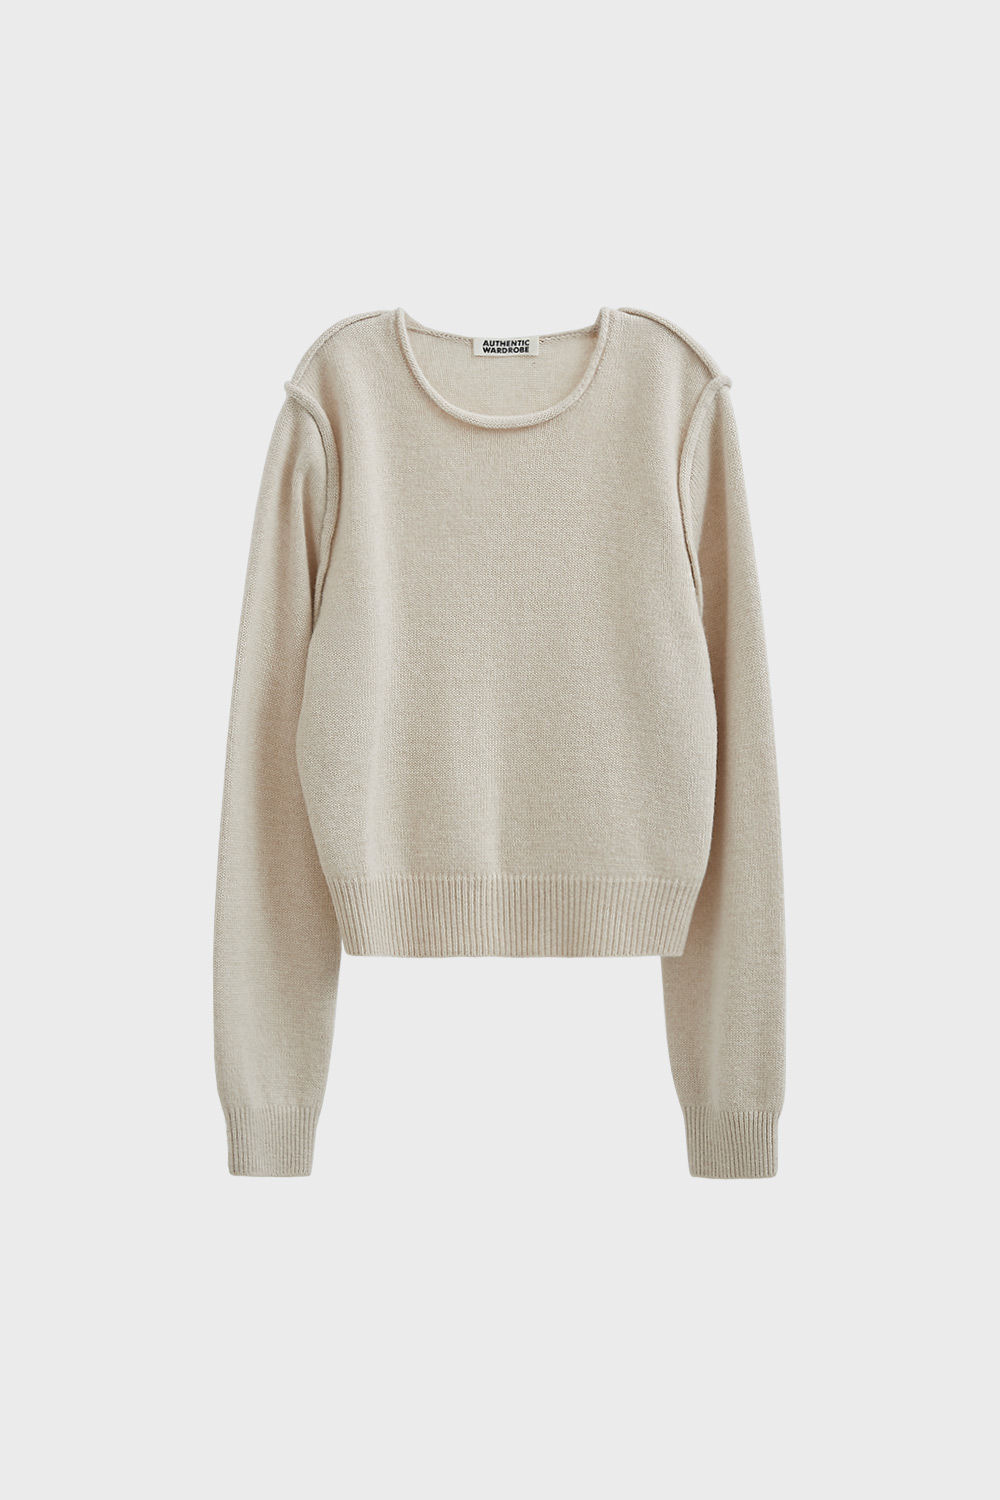 Seam line Accentuated Round Knitwear